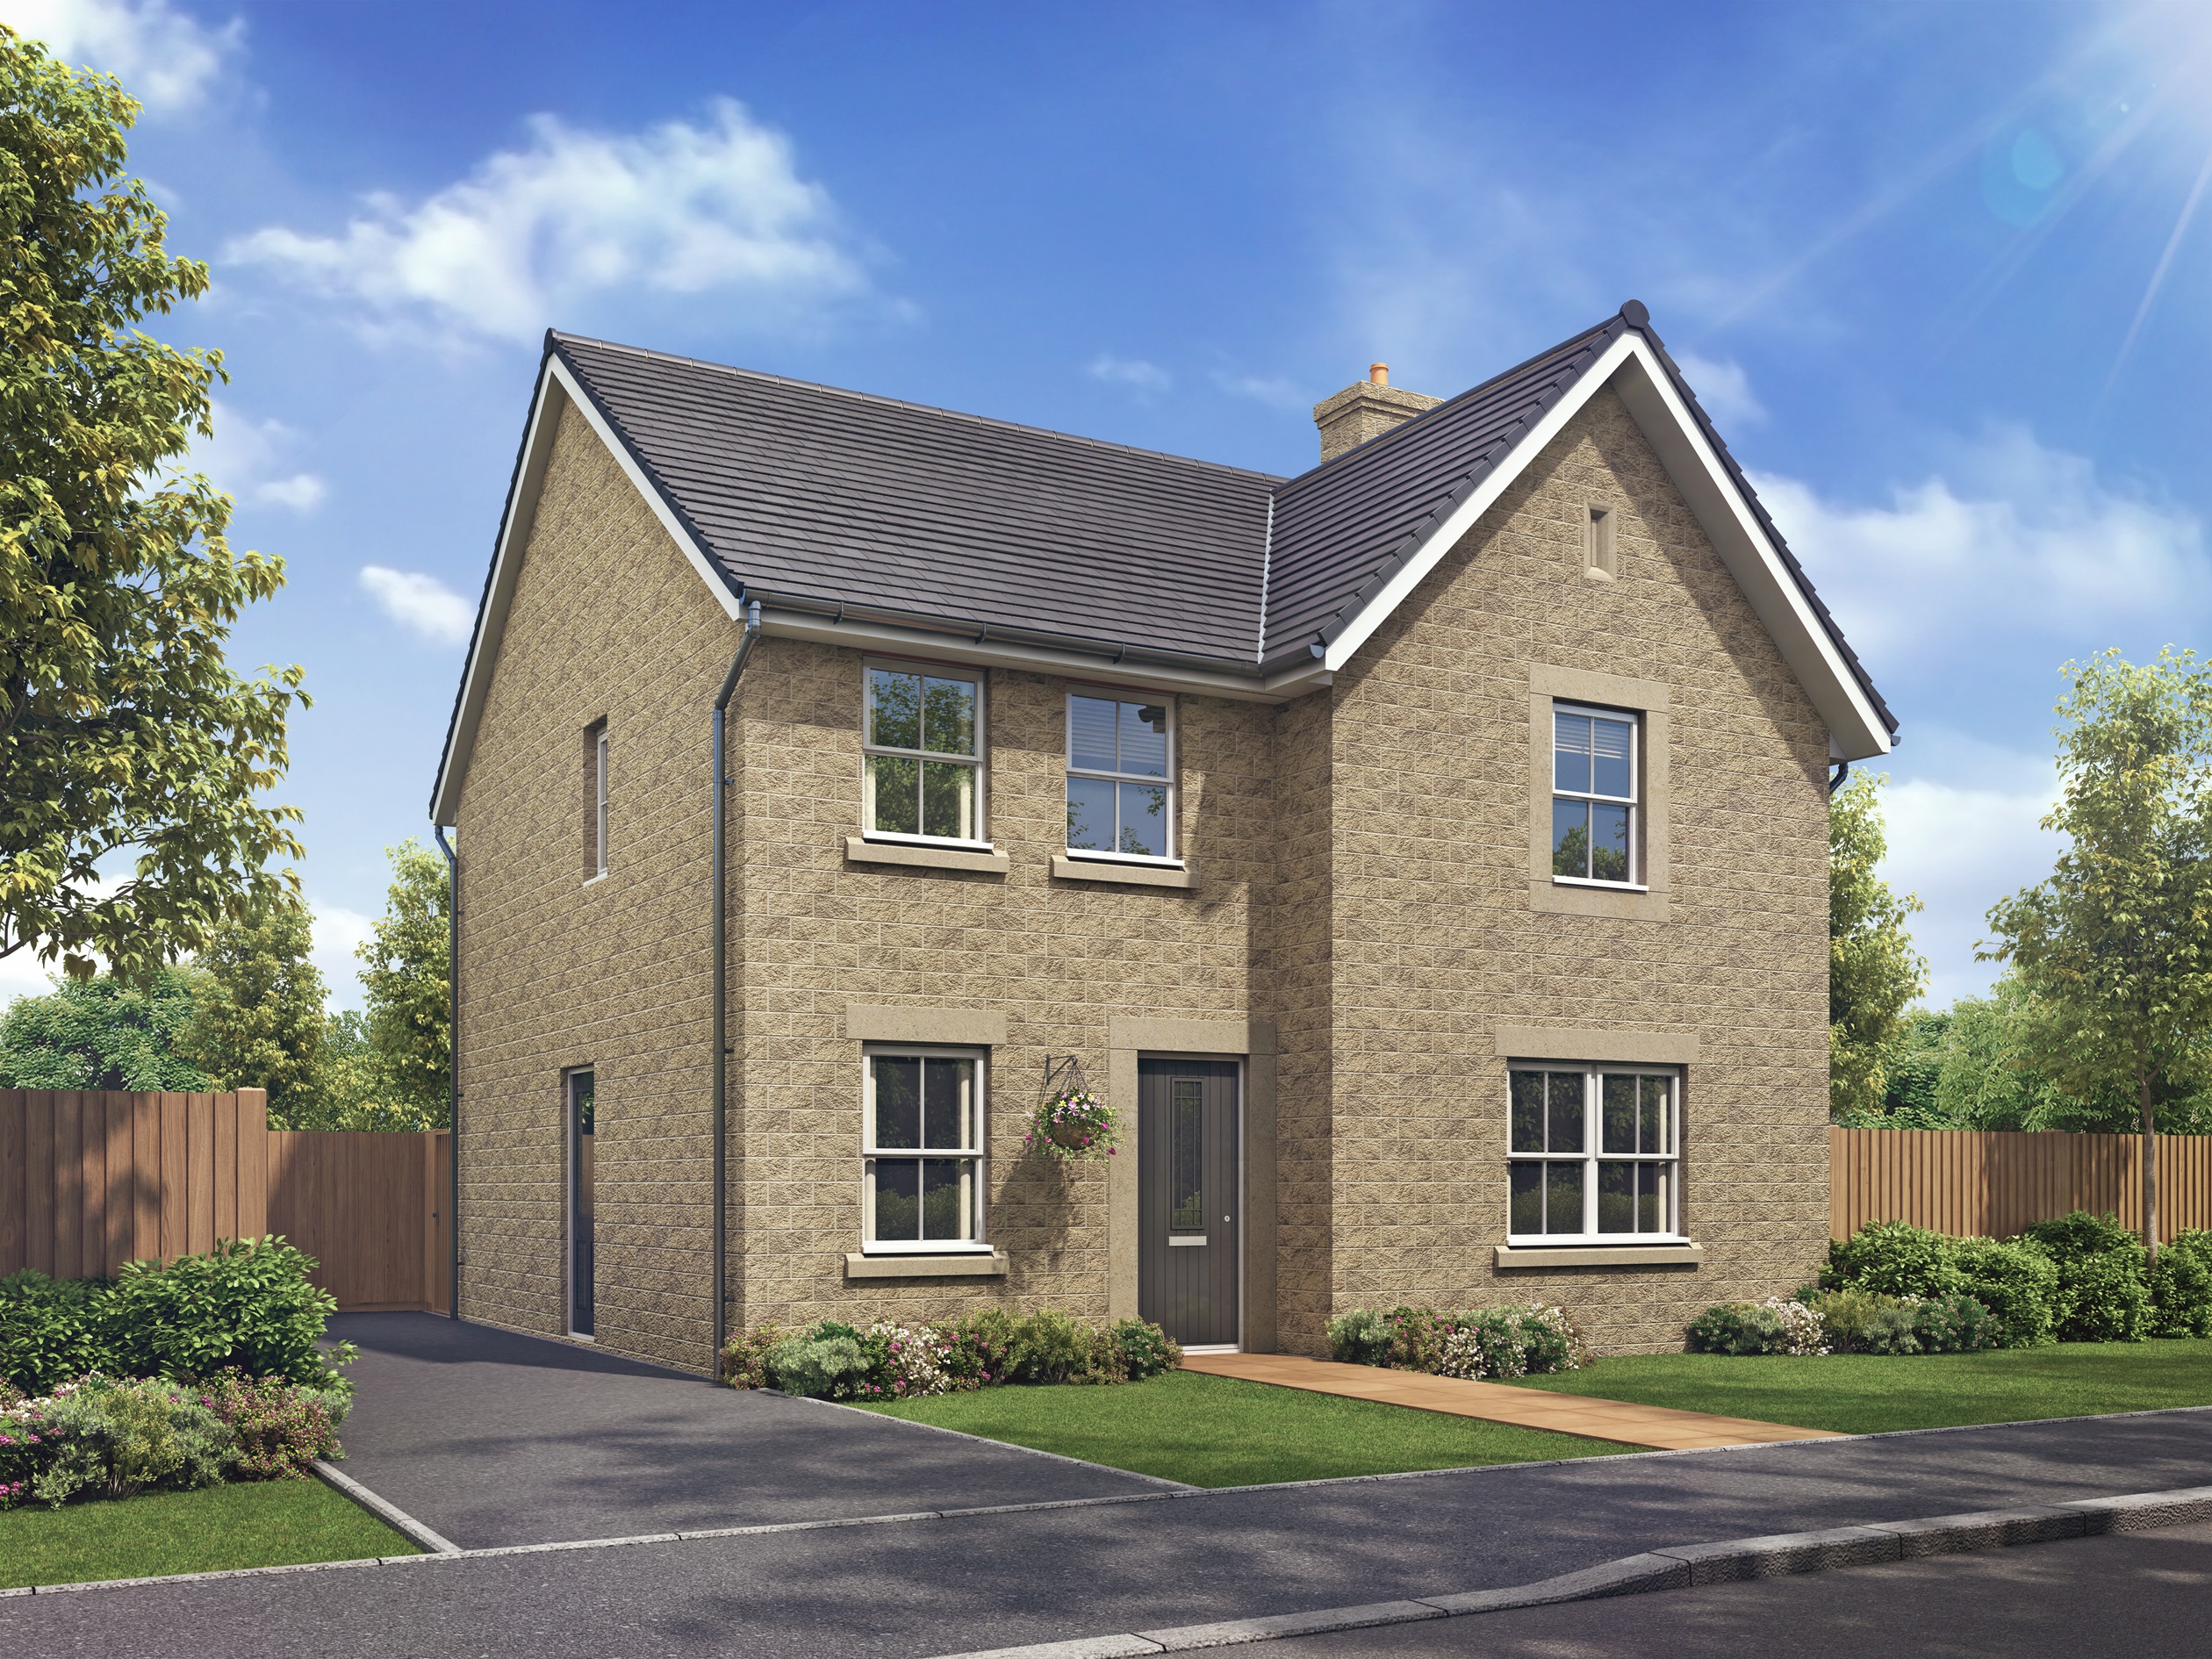 Property 1 of 10. Radleigh CGI In Stone Exterior